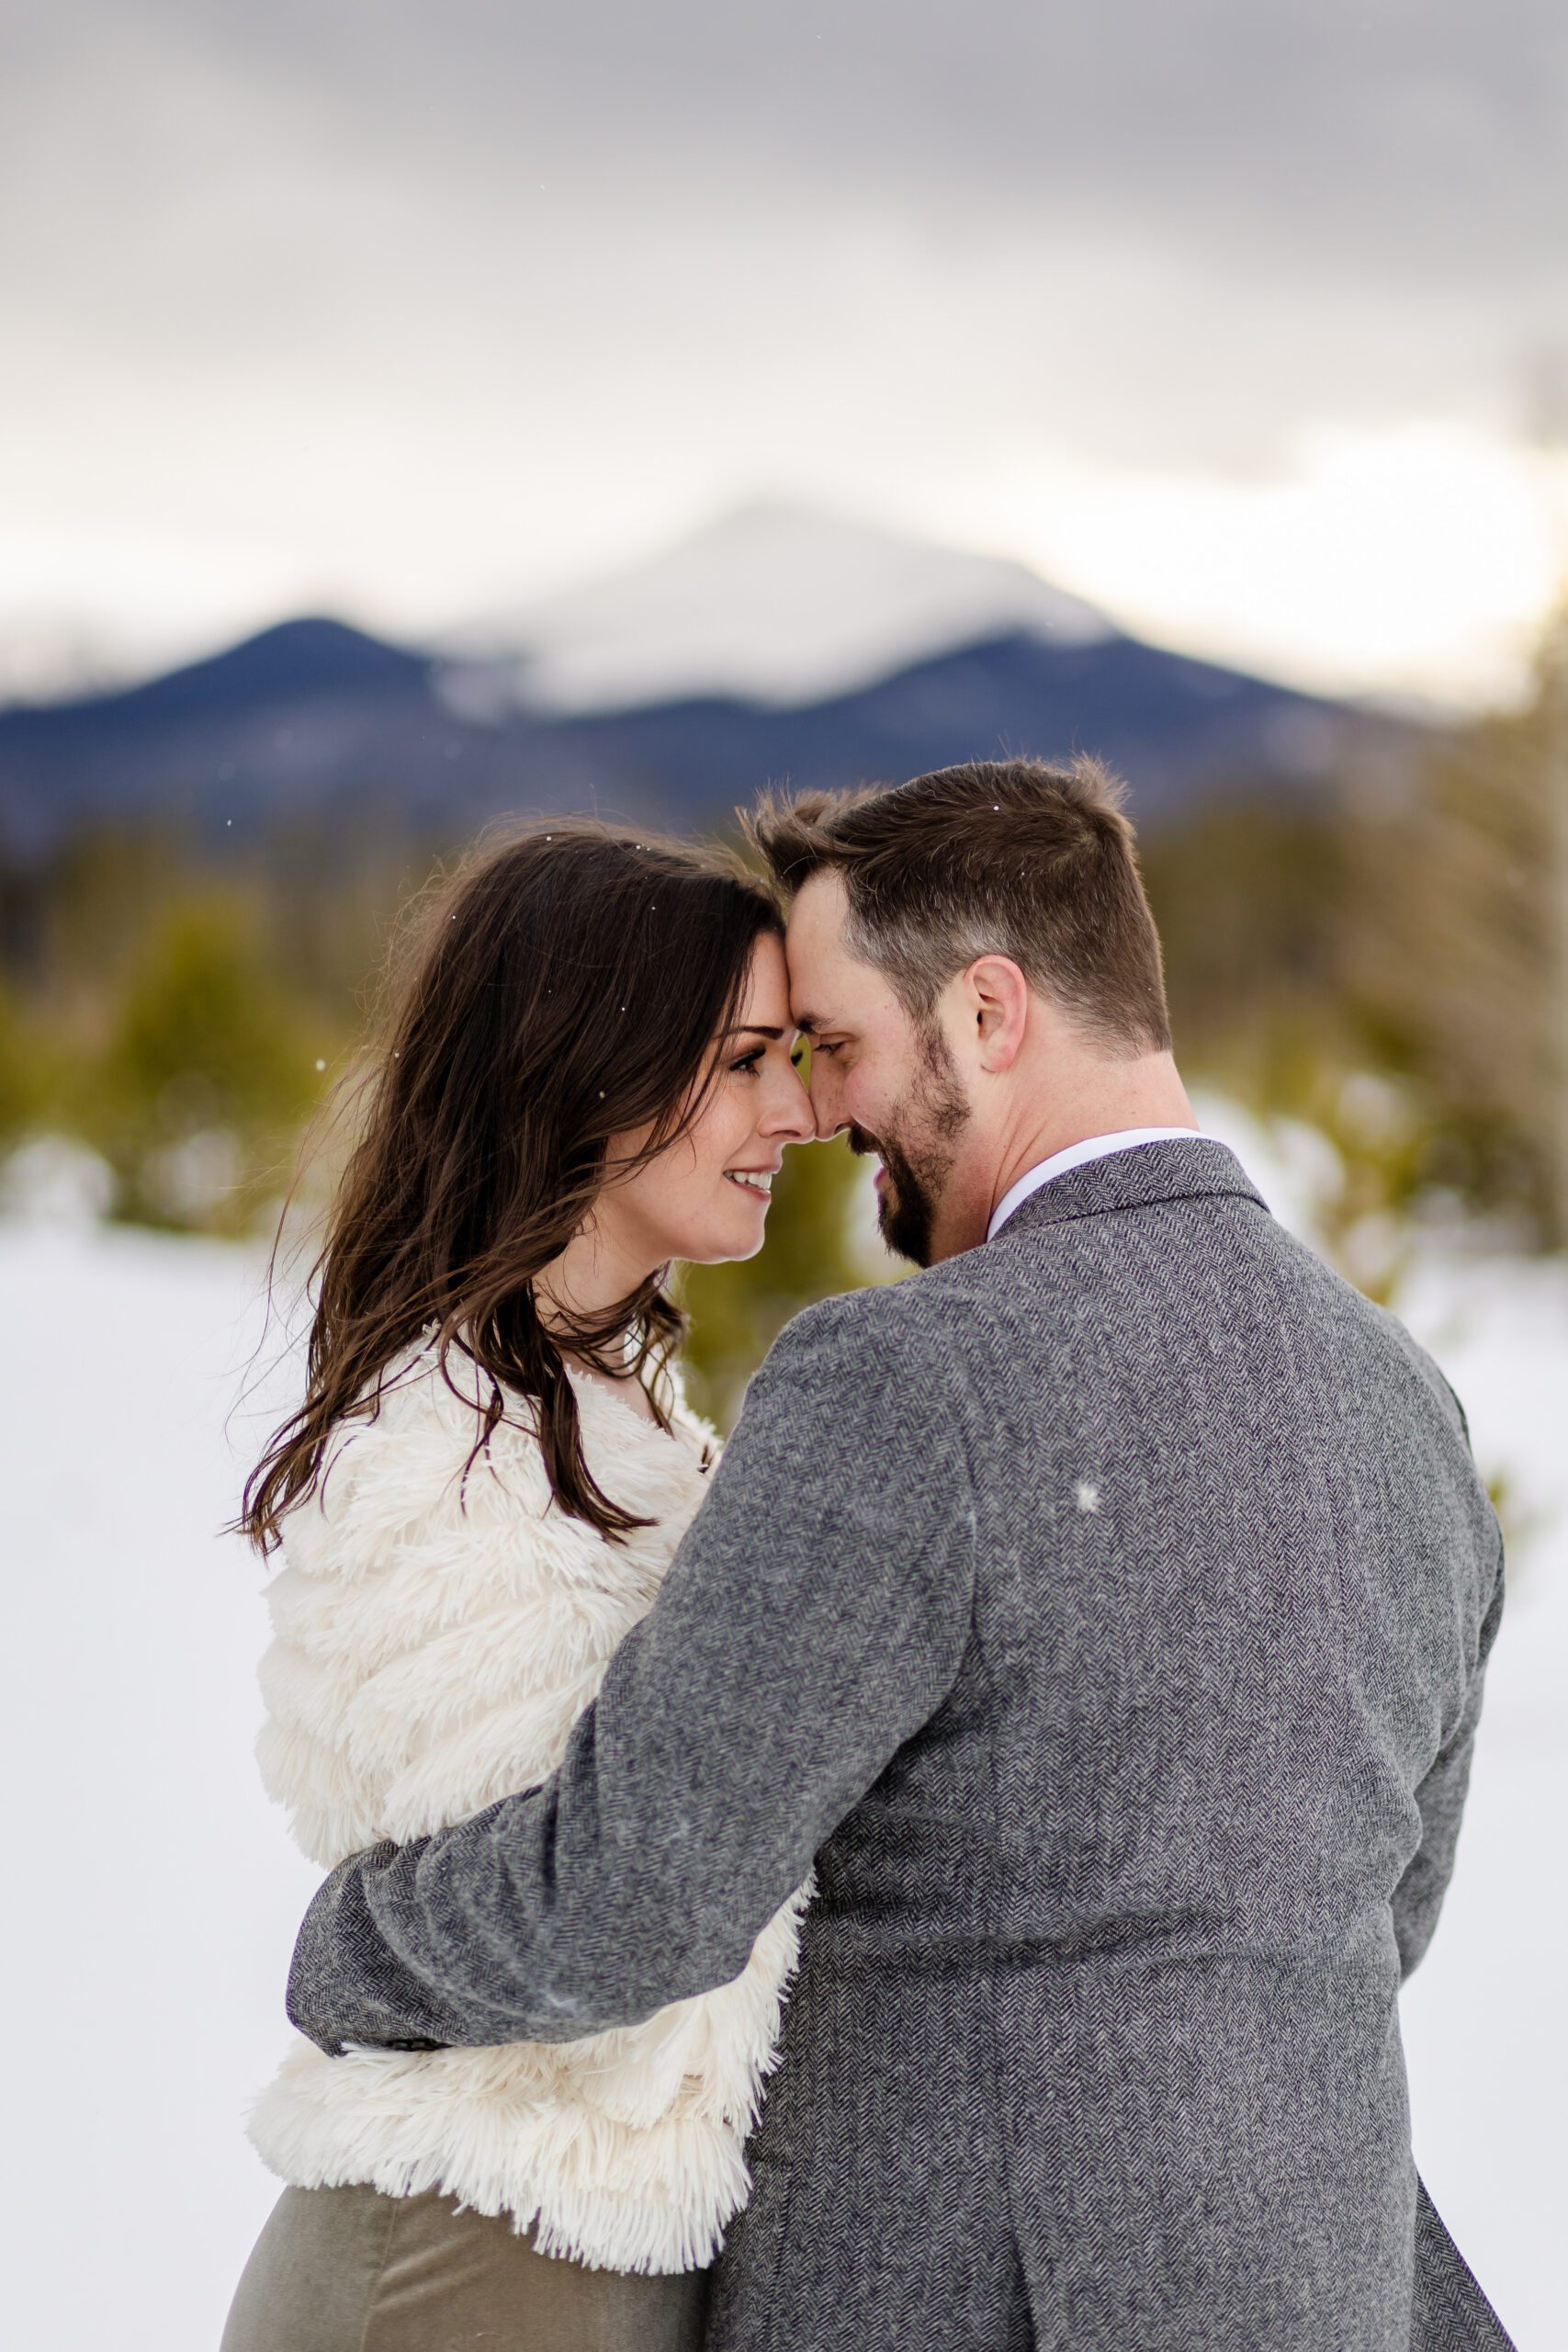 the bride and groom smiling at each other during their Winter Park elopement.